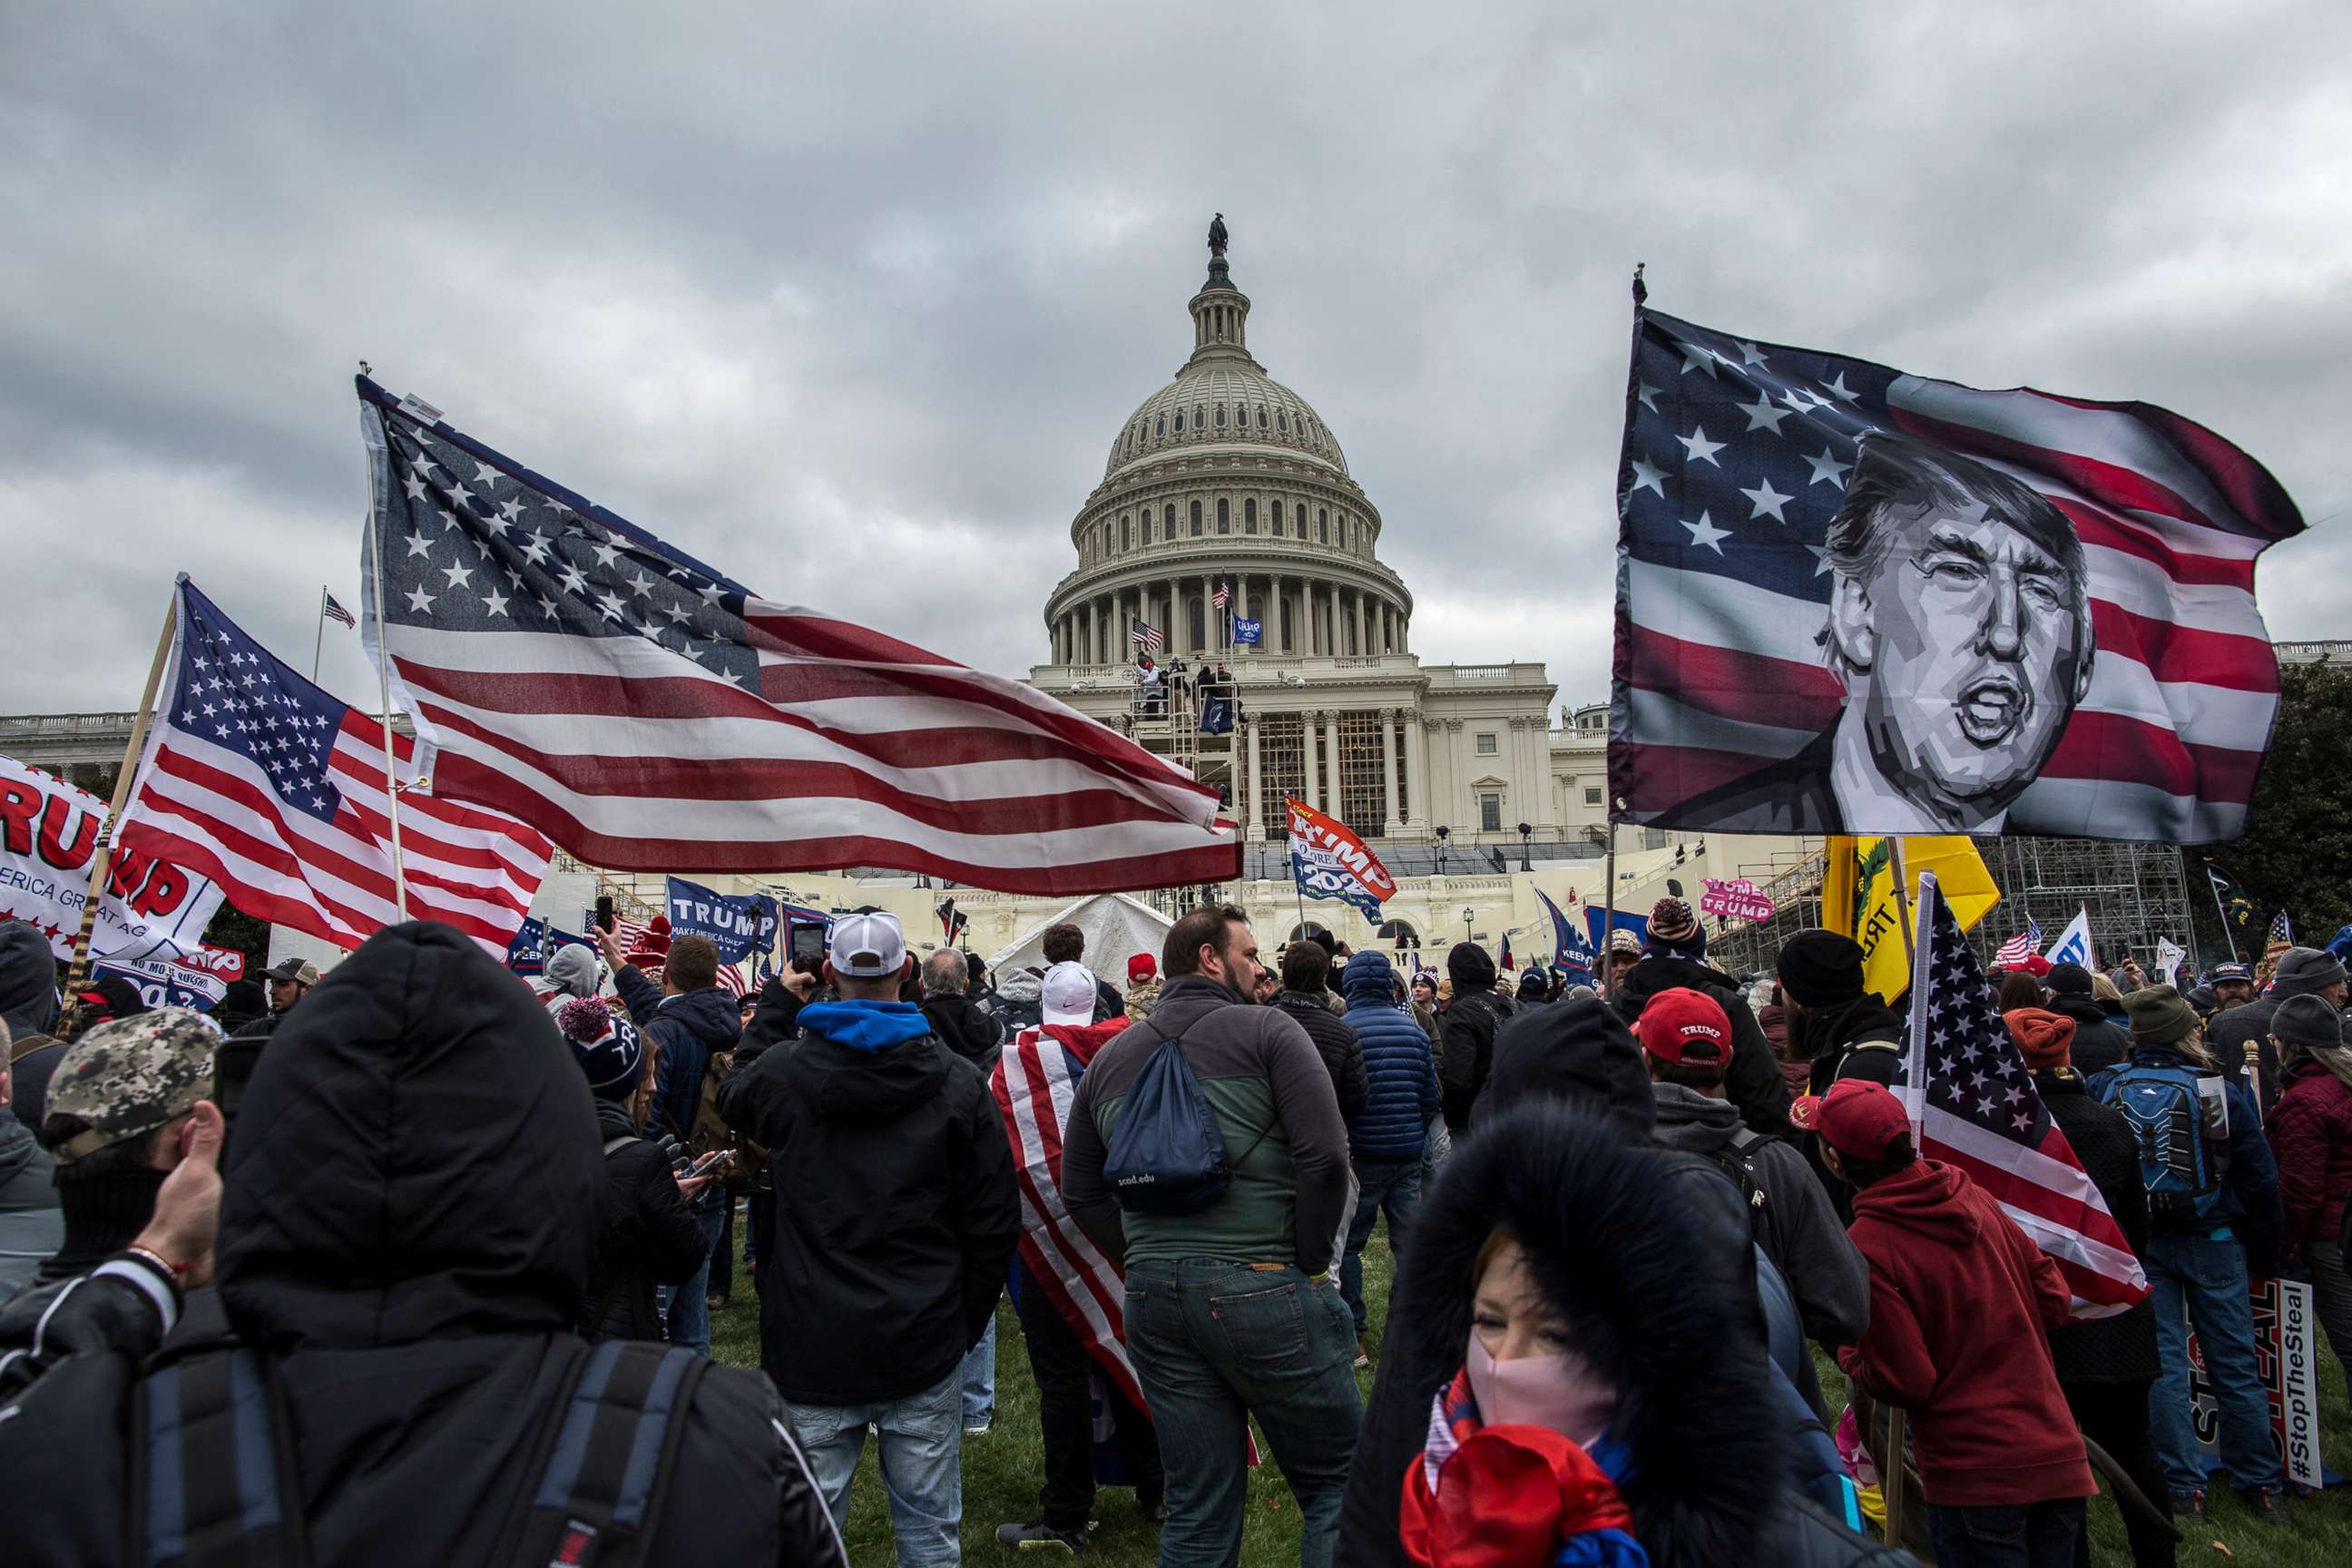 PHOTO: Supporters of President Donald Trump gather outside the Capitol in Washington prior to breaching security in protest of the presidential election results on Jan. 6, 2021.